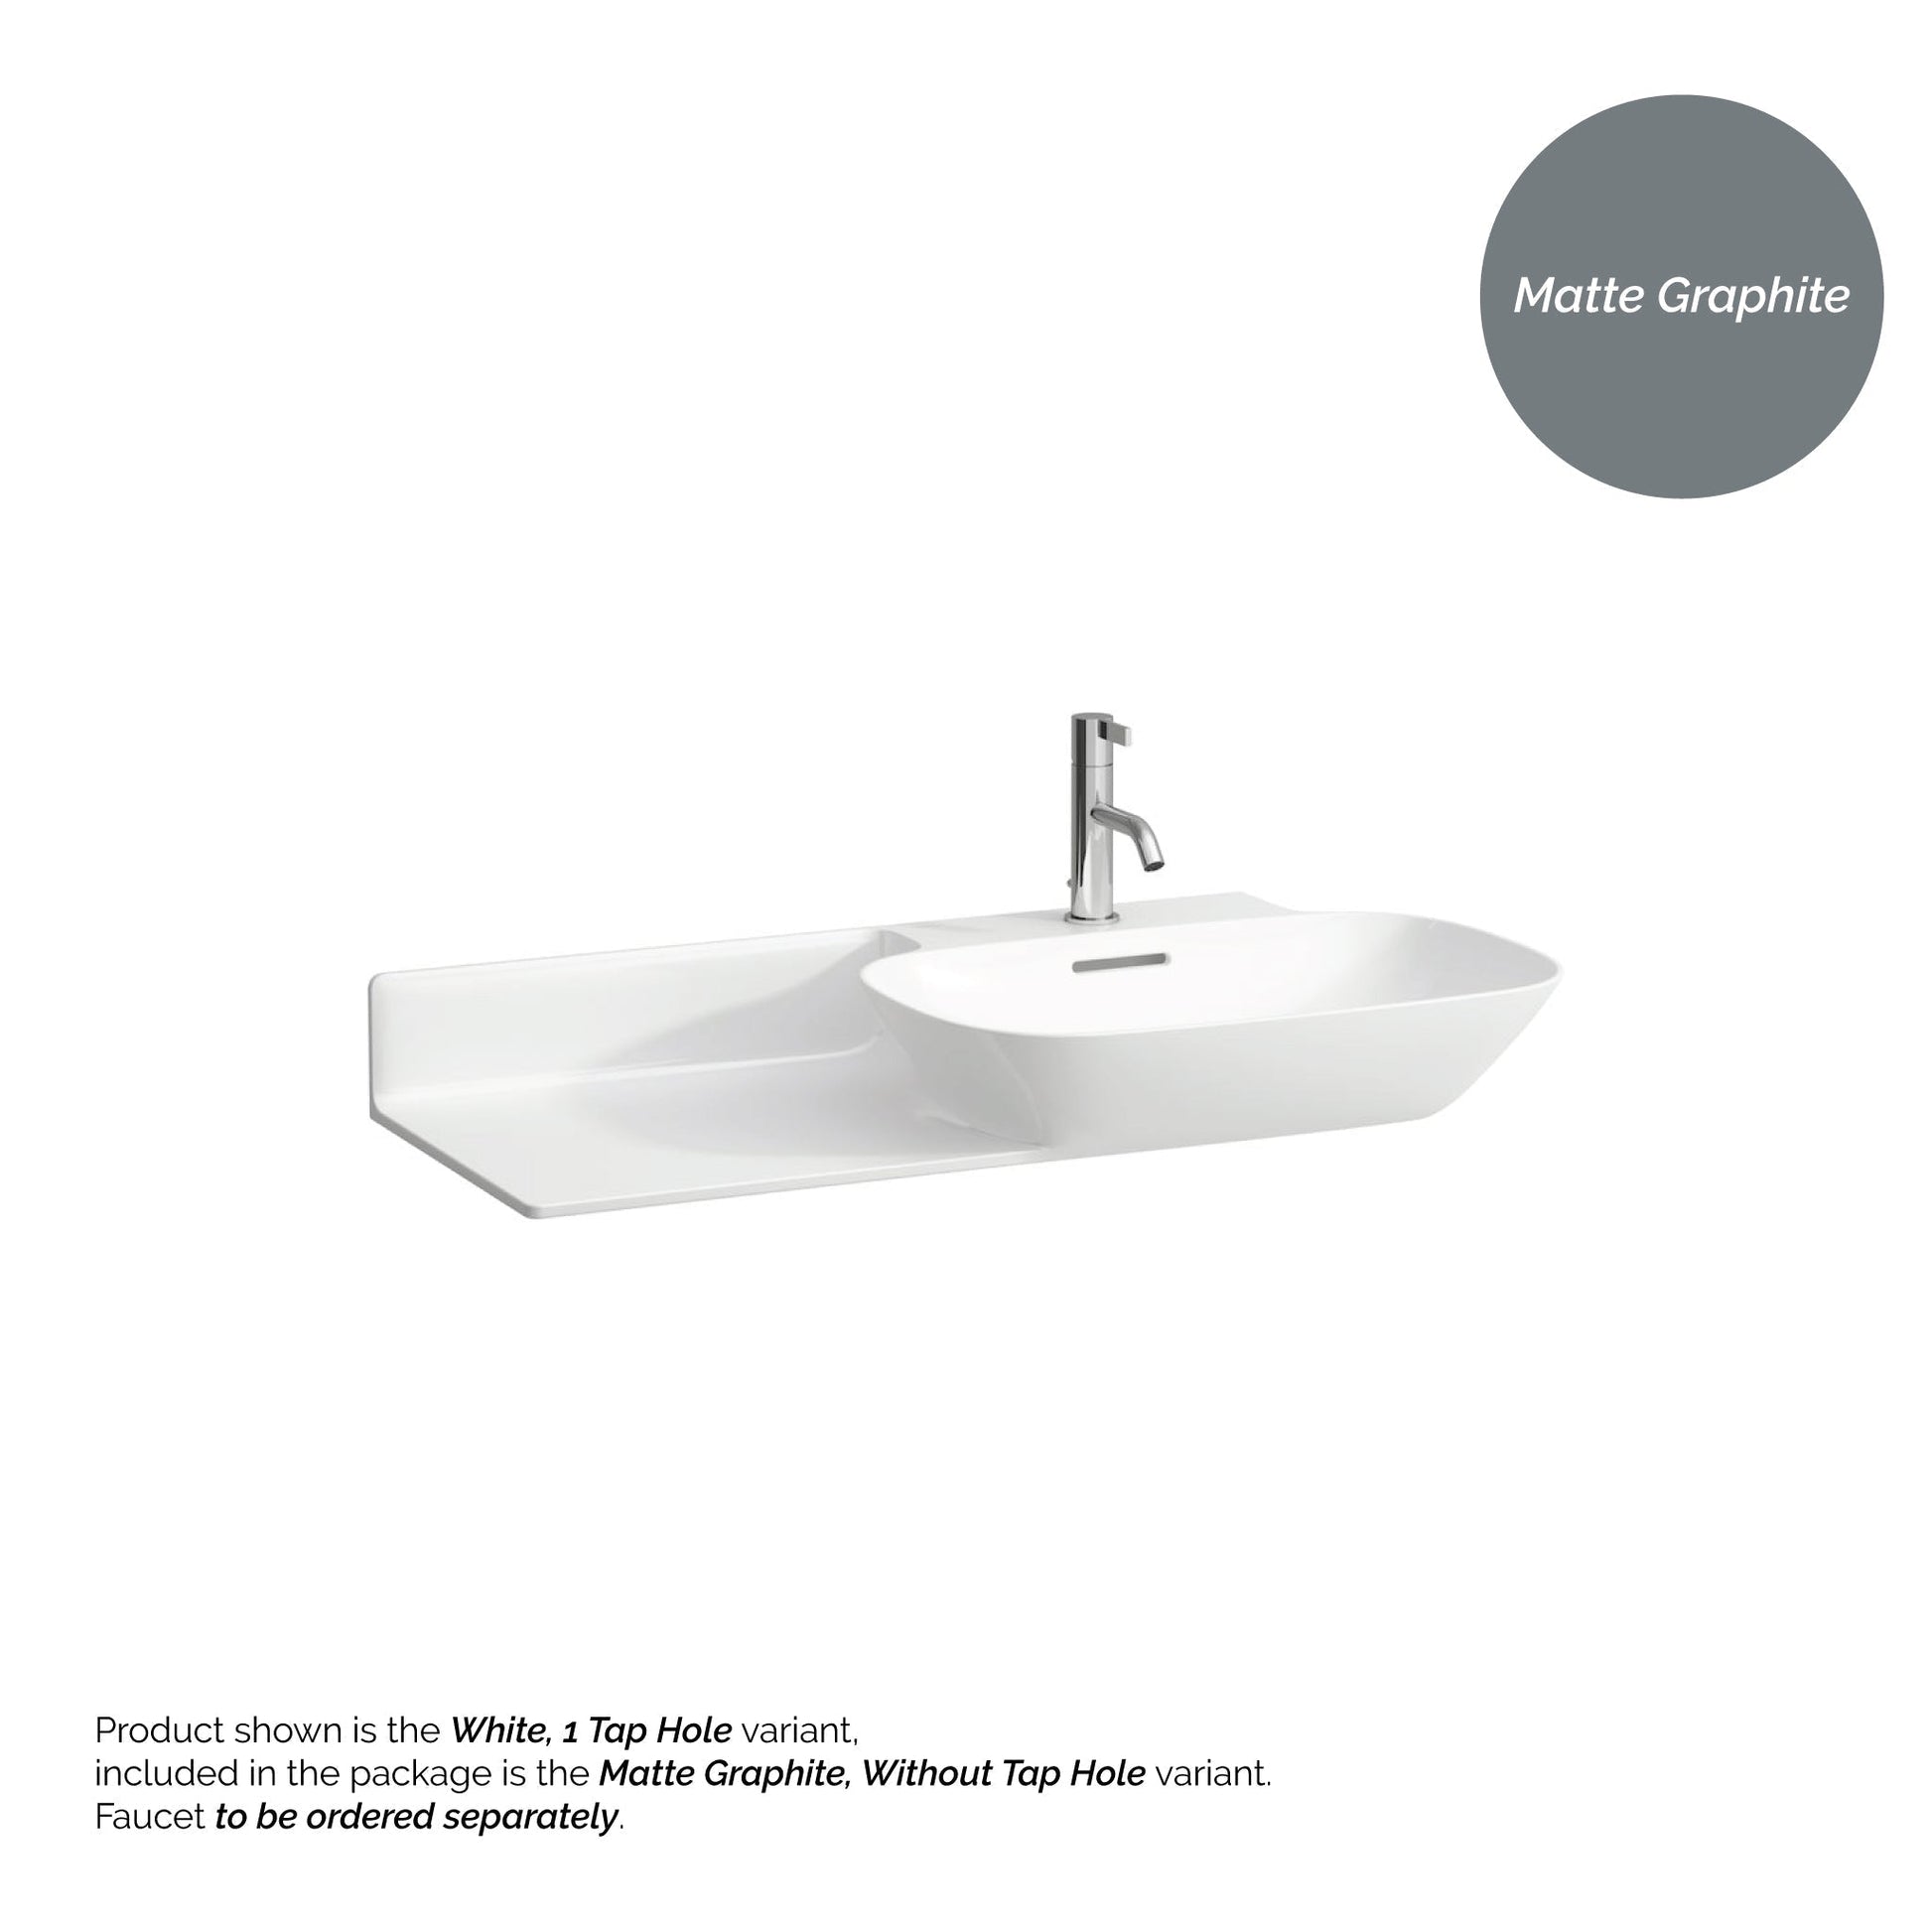 Laufen Ino 35" x 18" Matte Graphite Wall-Mounted Shelf-Left Bathroom Sink Without Faucet Hole